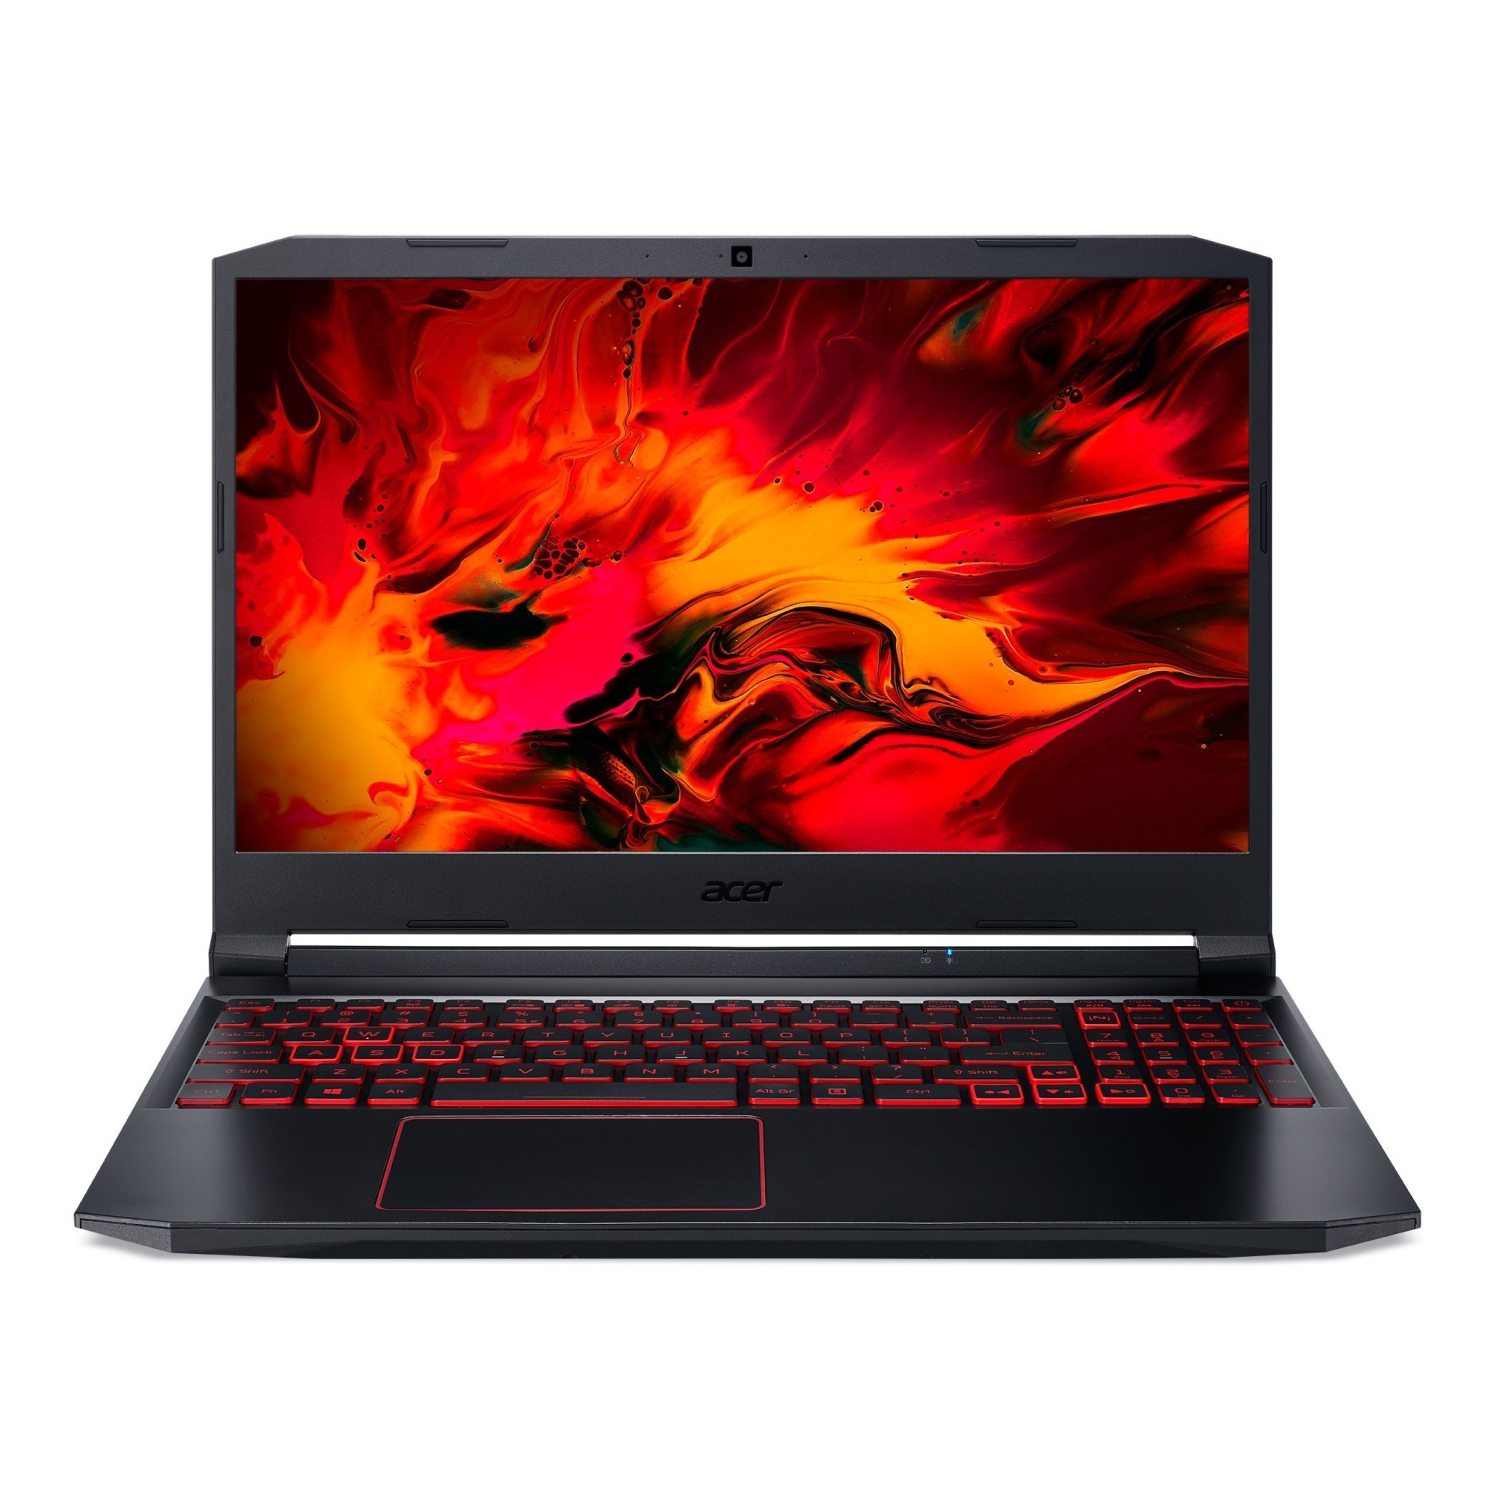 Refurbished (Excellent) - Acer 15.6" Nitro 144Hz Laptop (Intel i7-10750H/512GB SSD/8GB/Nvidia RTX3050Ti/Win10) - Manufacturer ReCertified w/ 1 Year Warranty